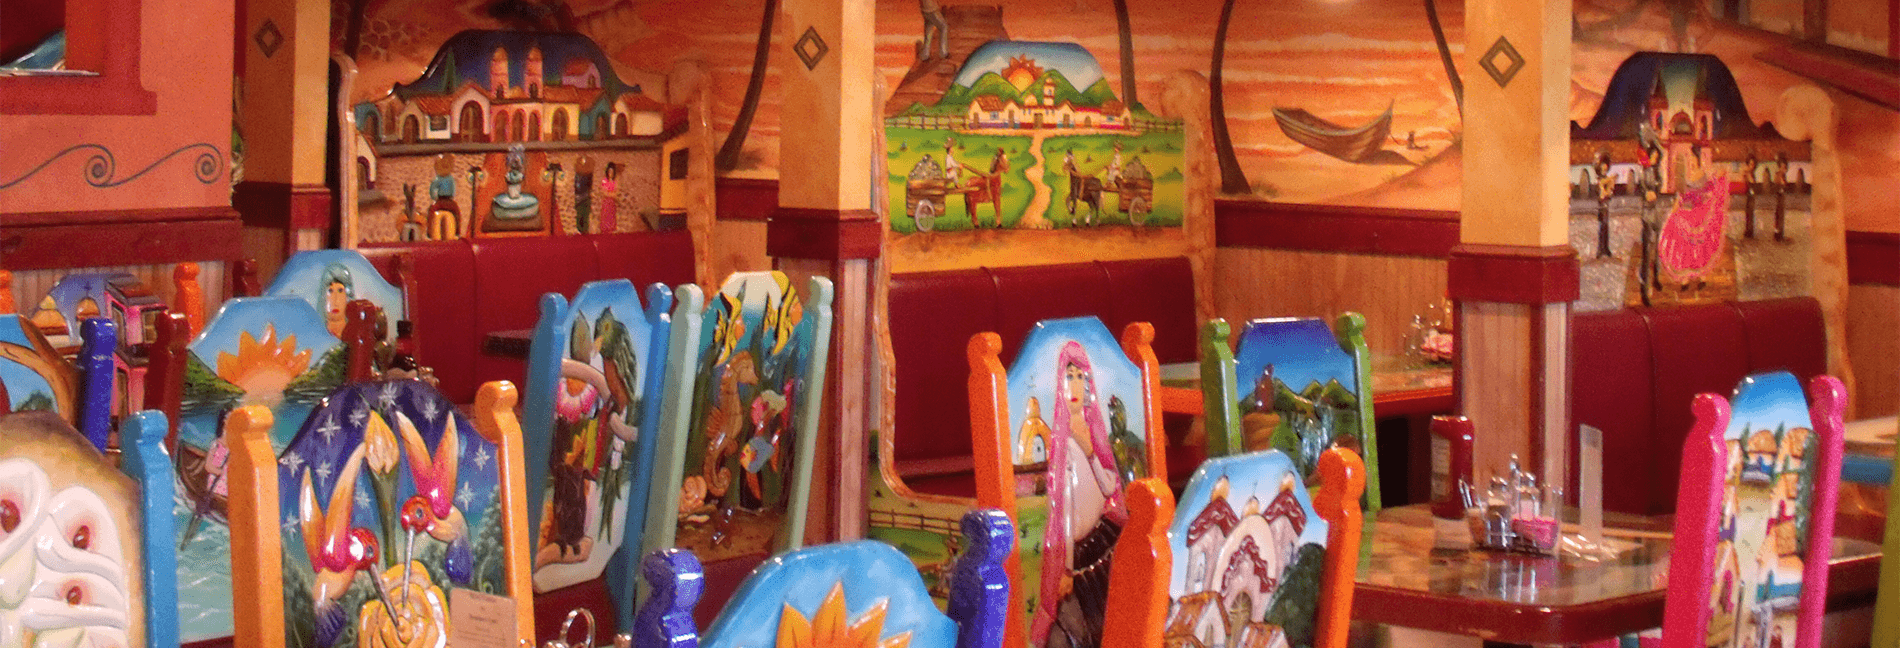 view of the colorful interior of the restaurant